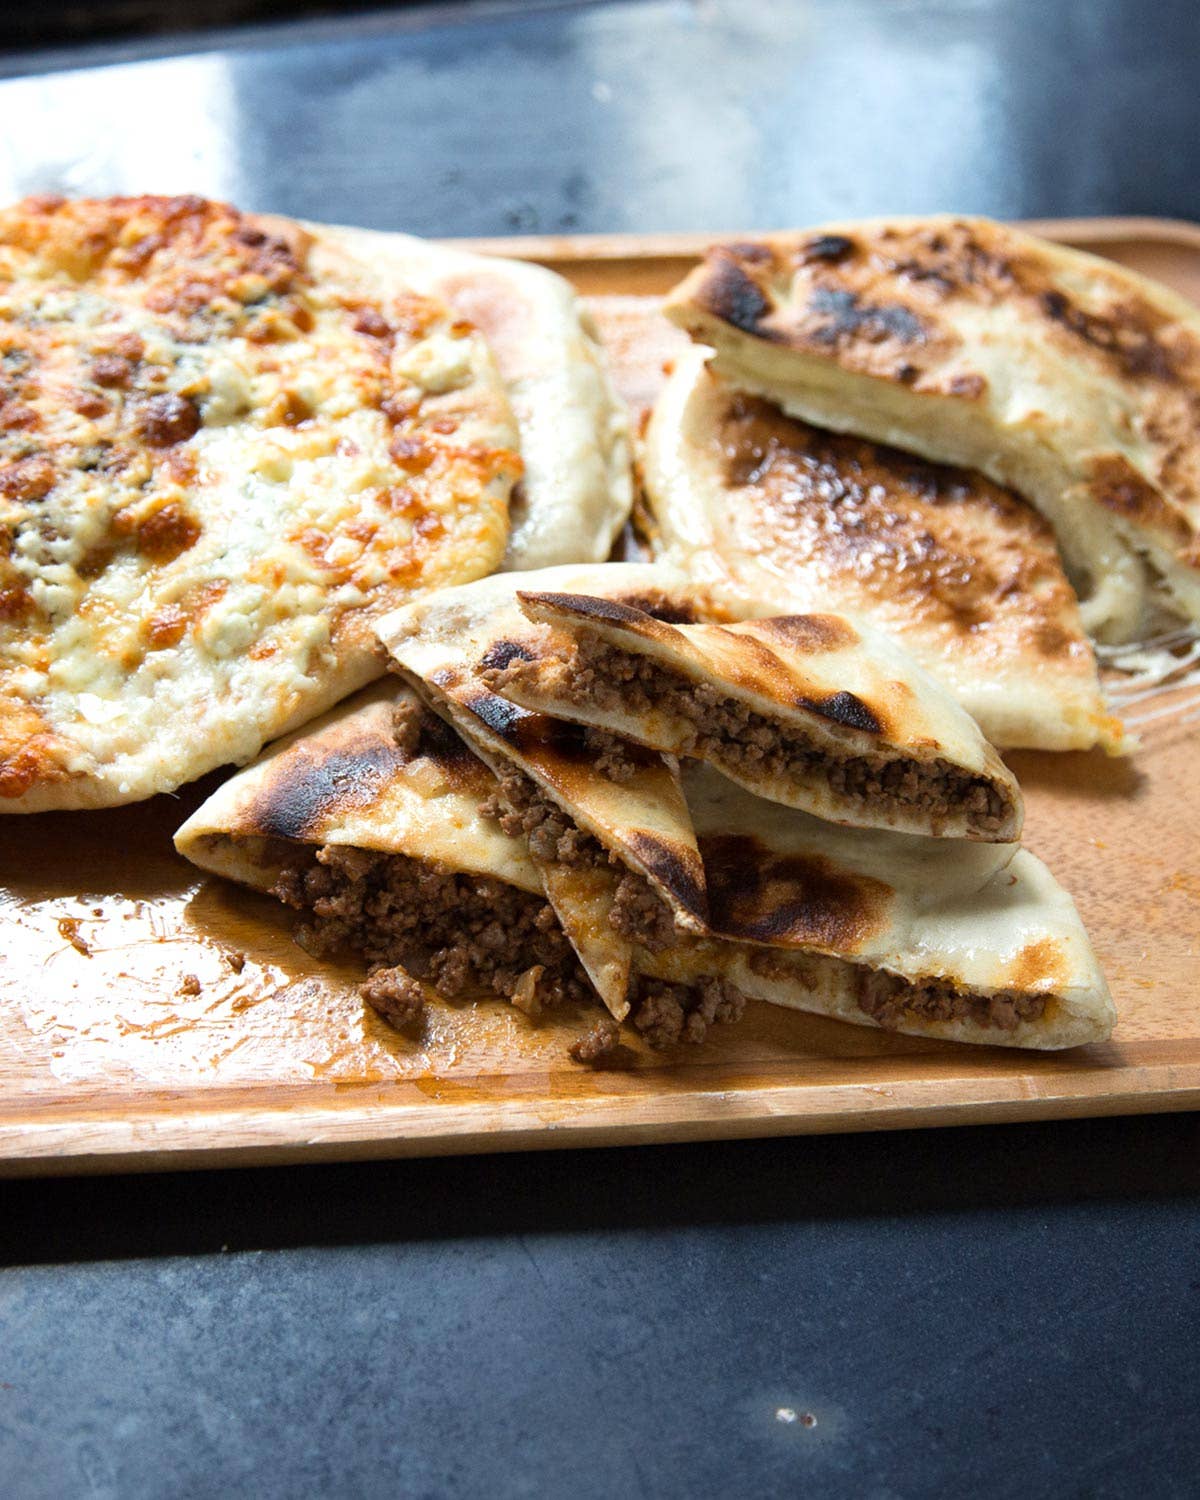 A Field Guide to Khachapuri, the Indomitable Cheese Bread of Georgia